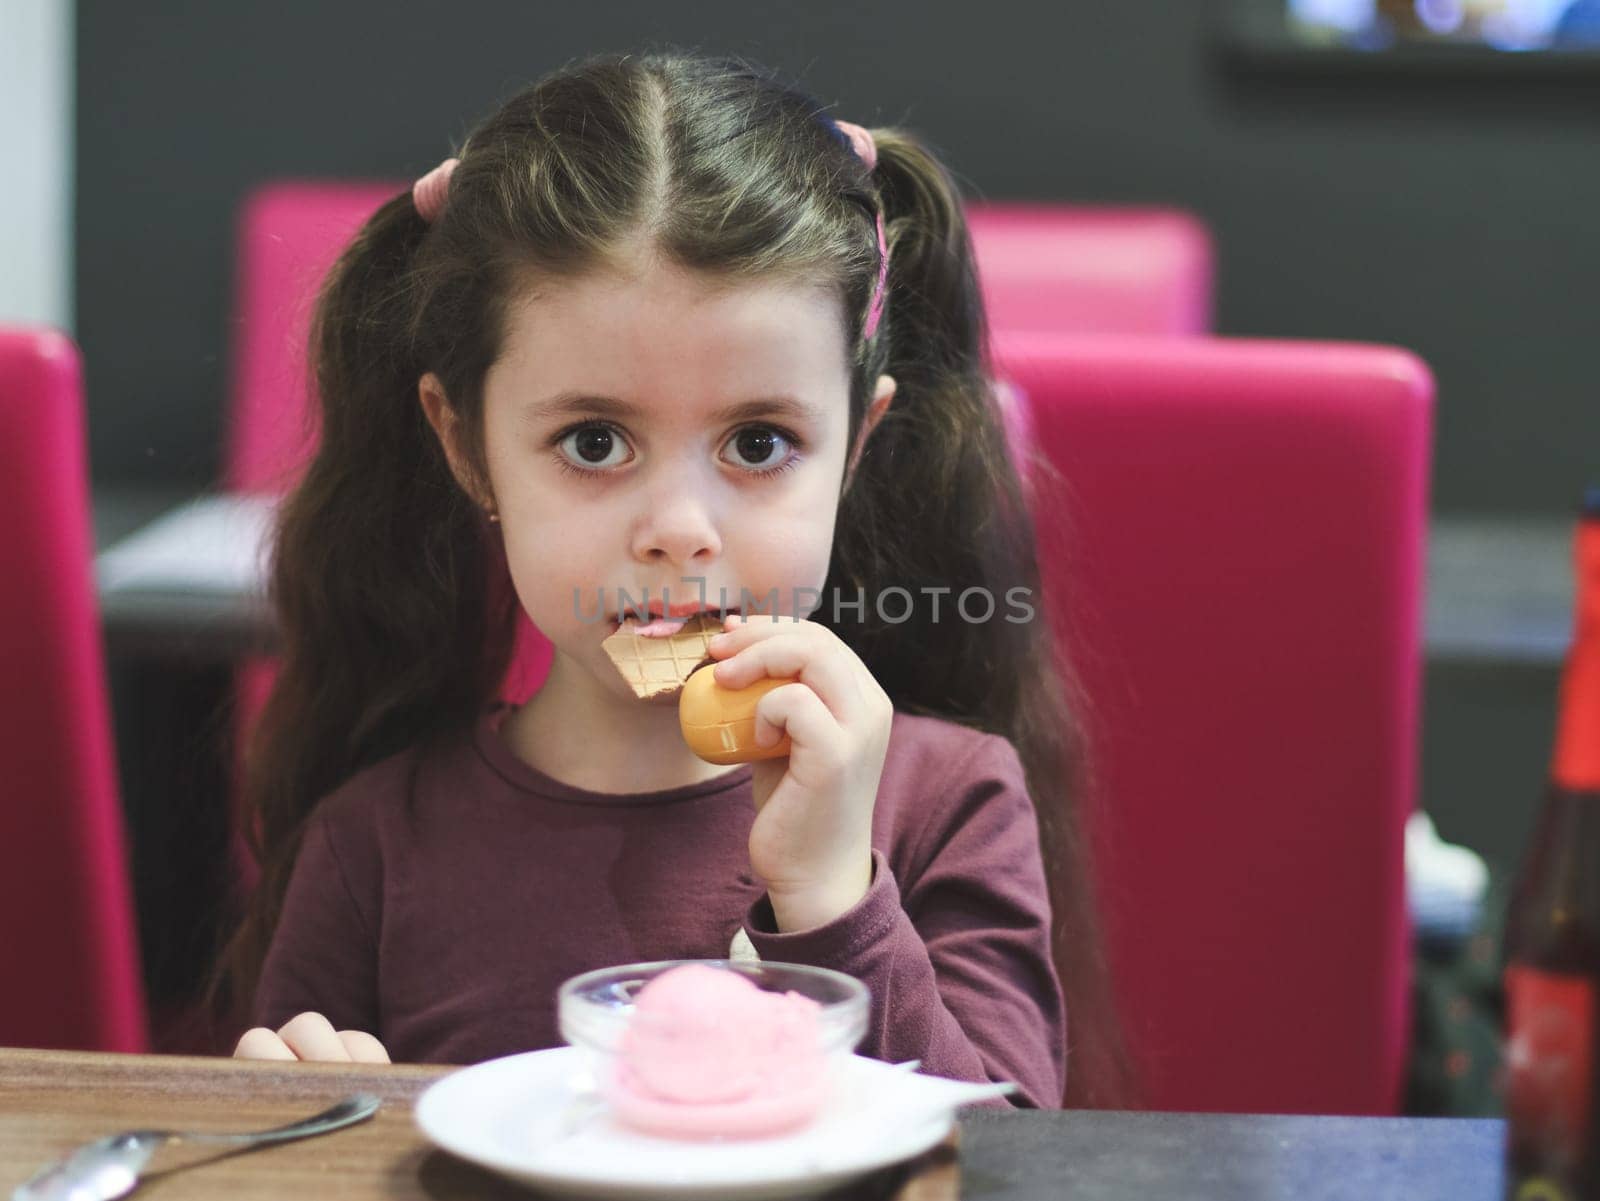 Portrait of a beautiful Caucasian brunette girl with big brown eyes and two ponytails on her head sitting at a table and eating an ice cream waffle in a cafe on a blurred background, close-up side view with depth of field.